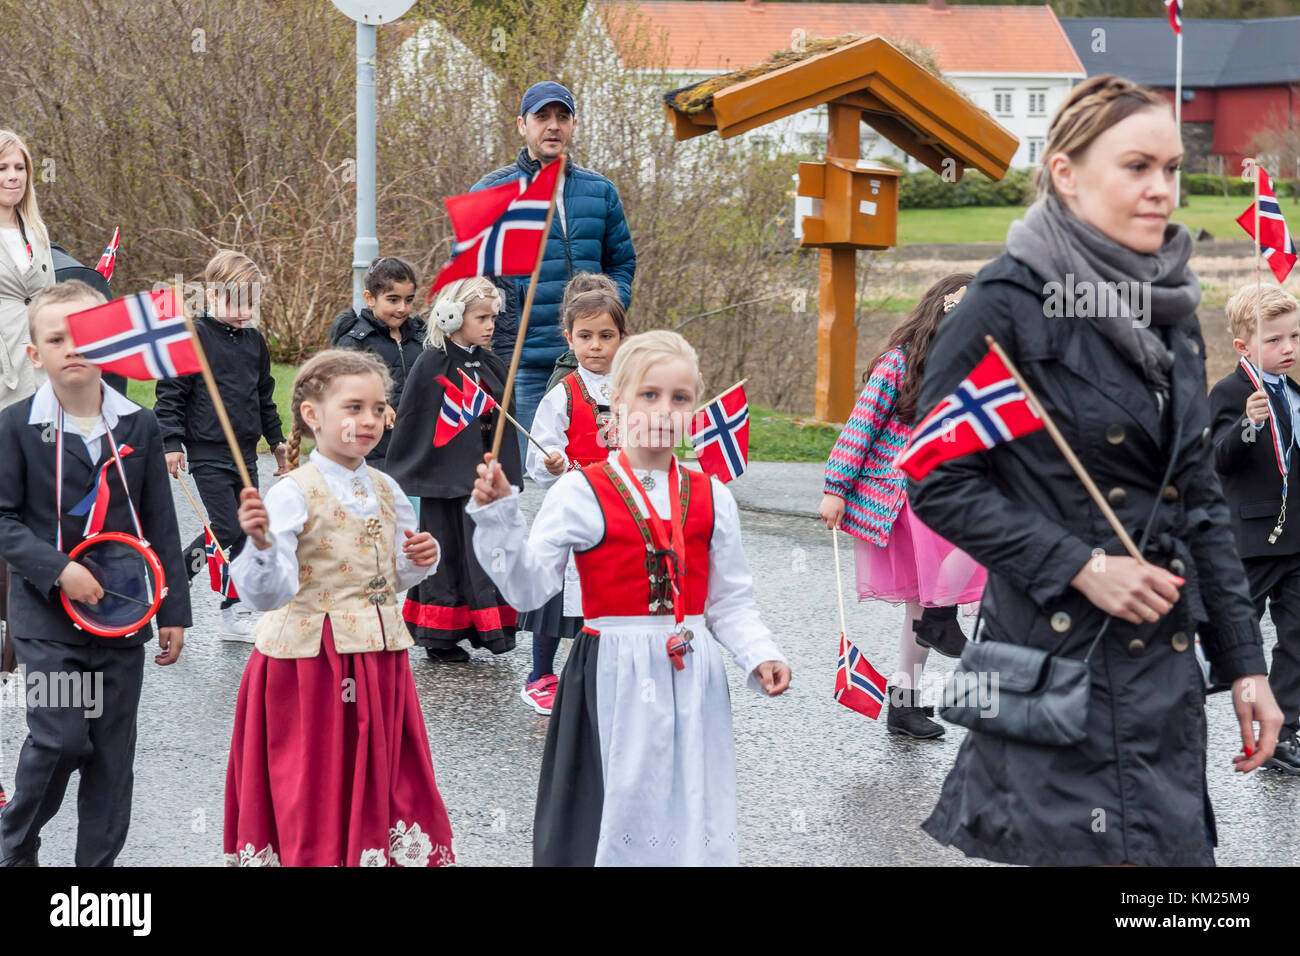 Verdal Norway May 17 17 National Day In Norway Norwegians At Traditional Celebration And Parade On May 17 17 In Verdal People On Parde Be Stock Photo Alamy